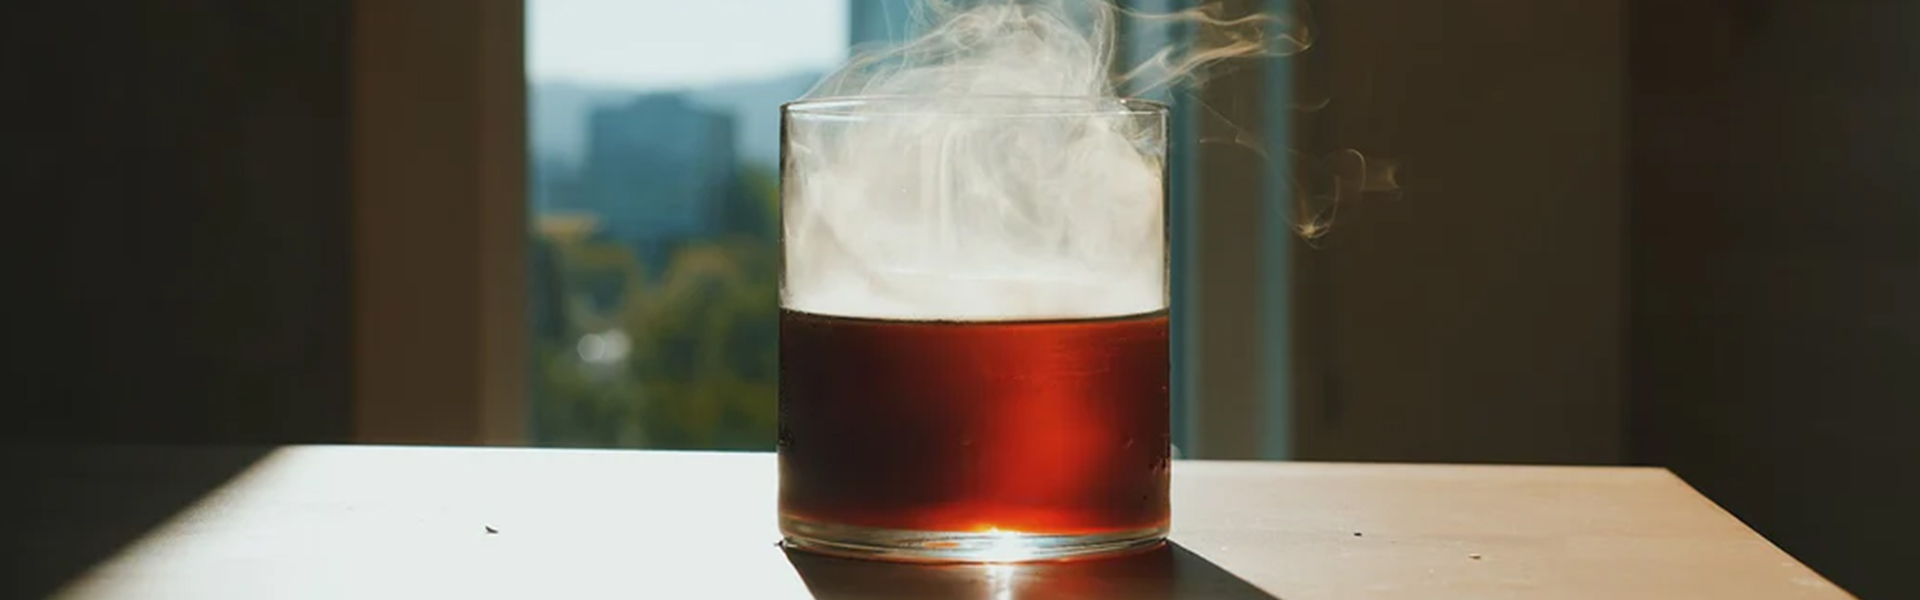 Cold old fashioned drink of a dark amber liquid with smoke.